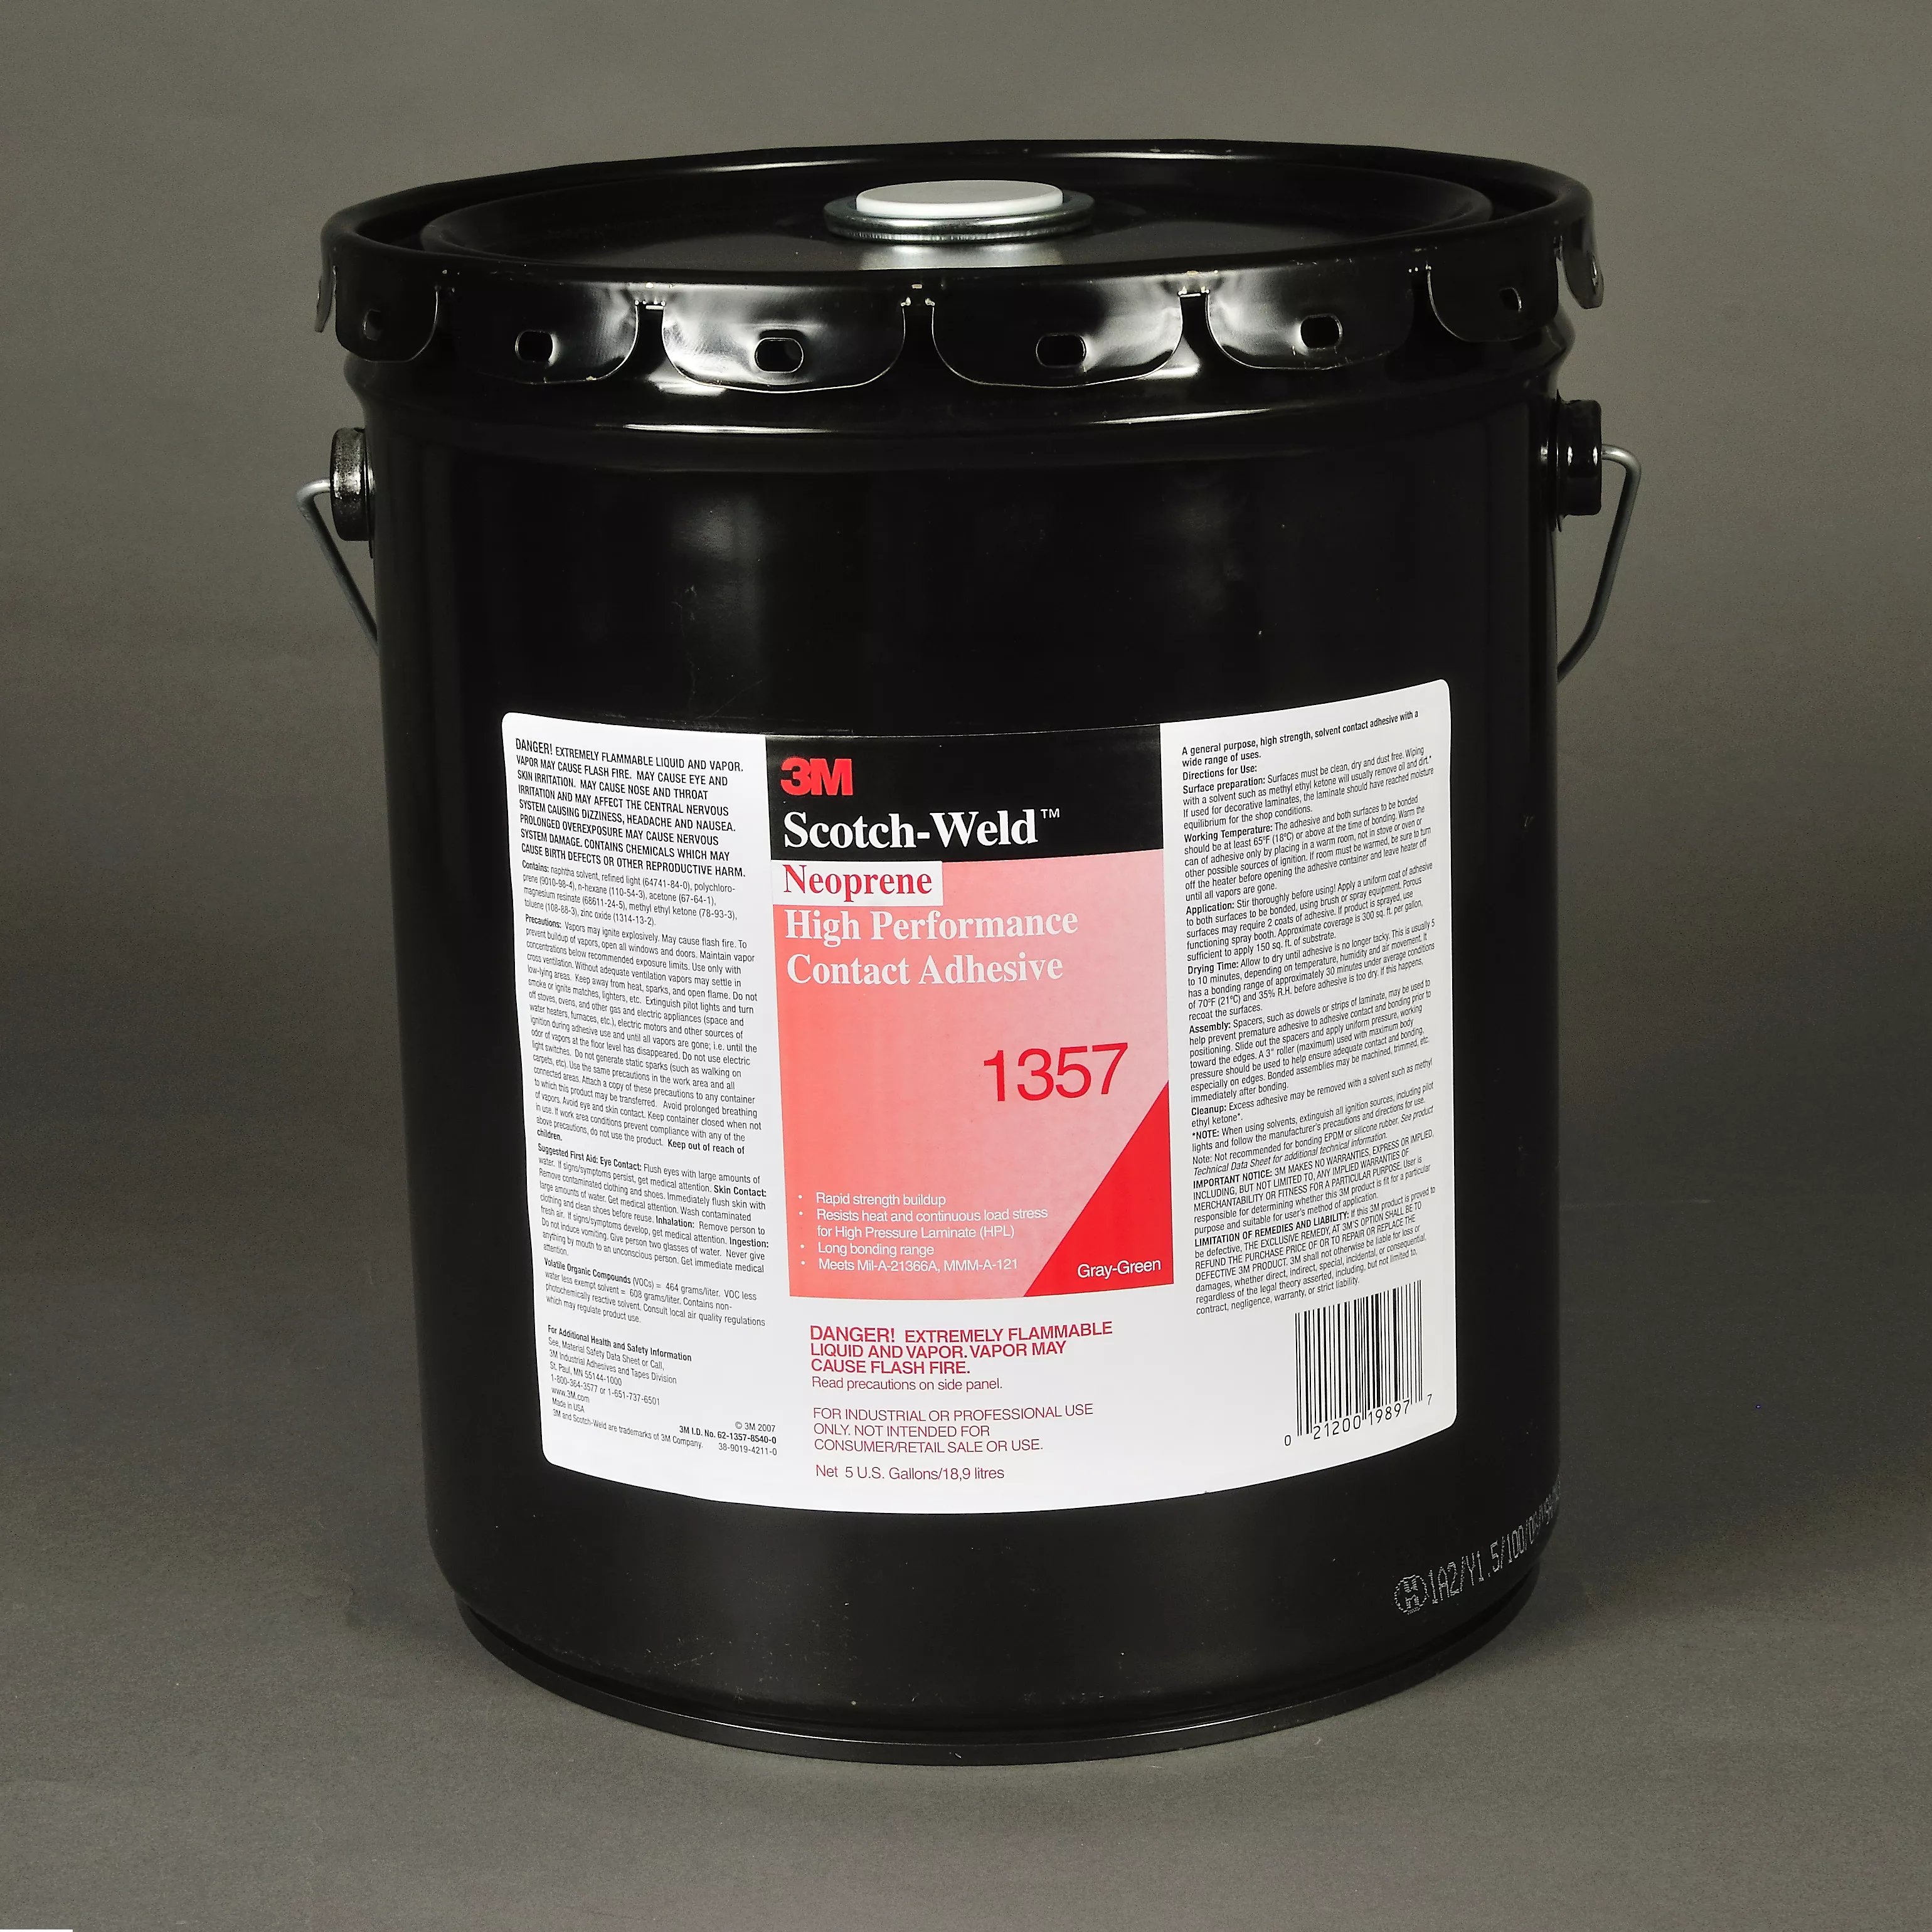 3M™ Neoprene High Performance Contact Adhesive 1357, Gray-Green, 5
Gallon Pour Spout (Pail), 1 Can/Drum